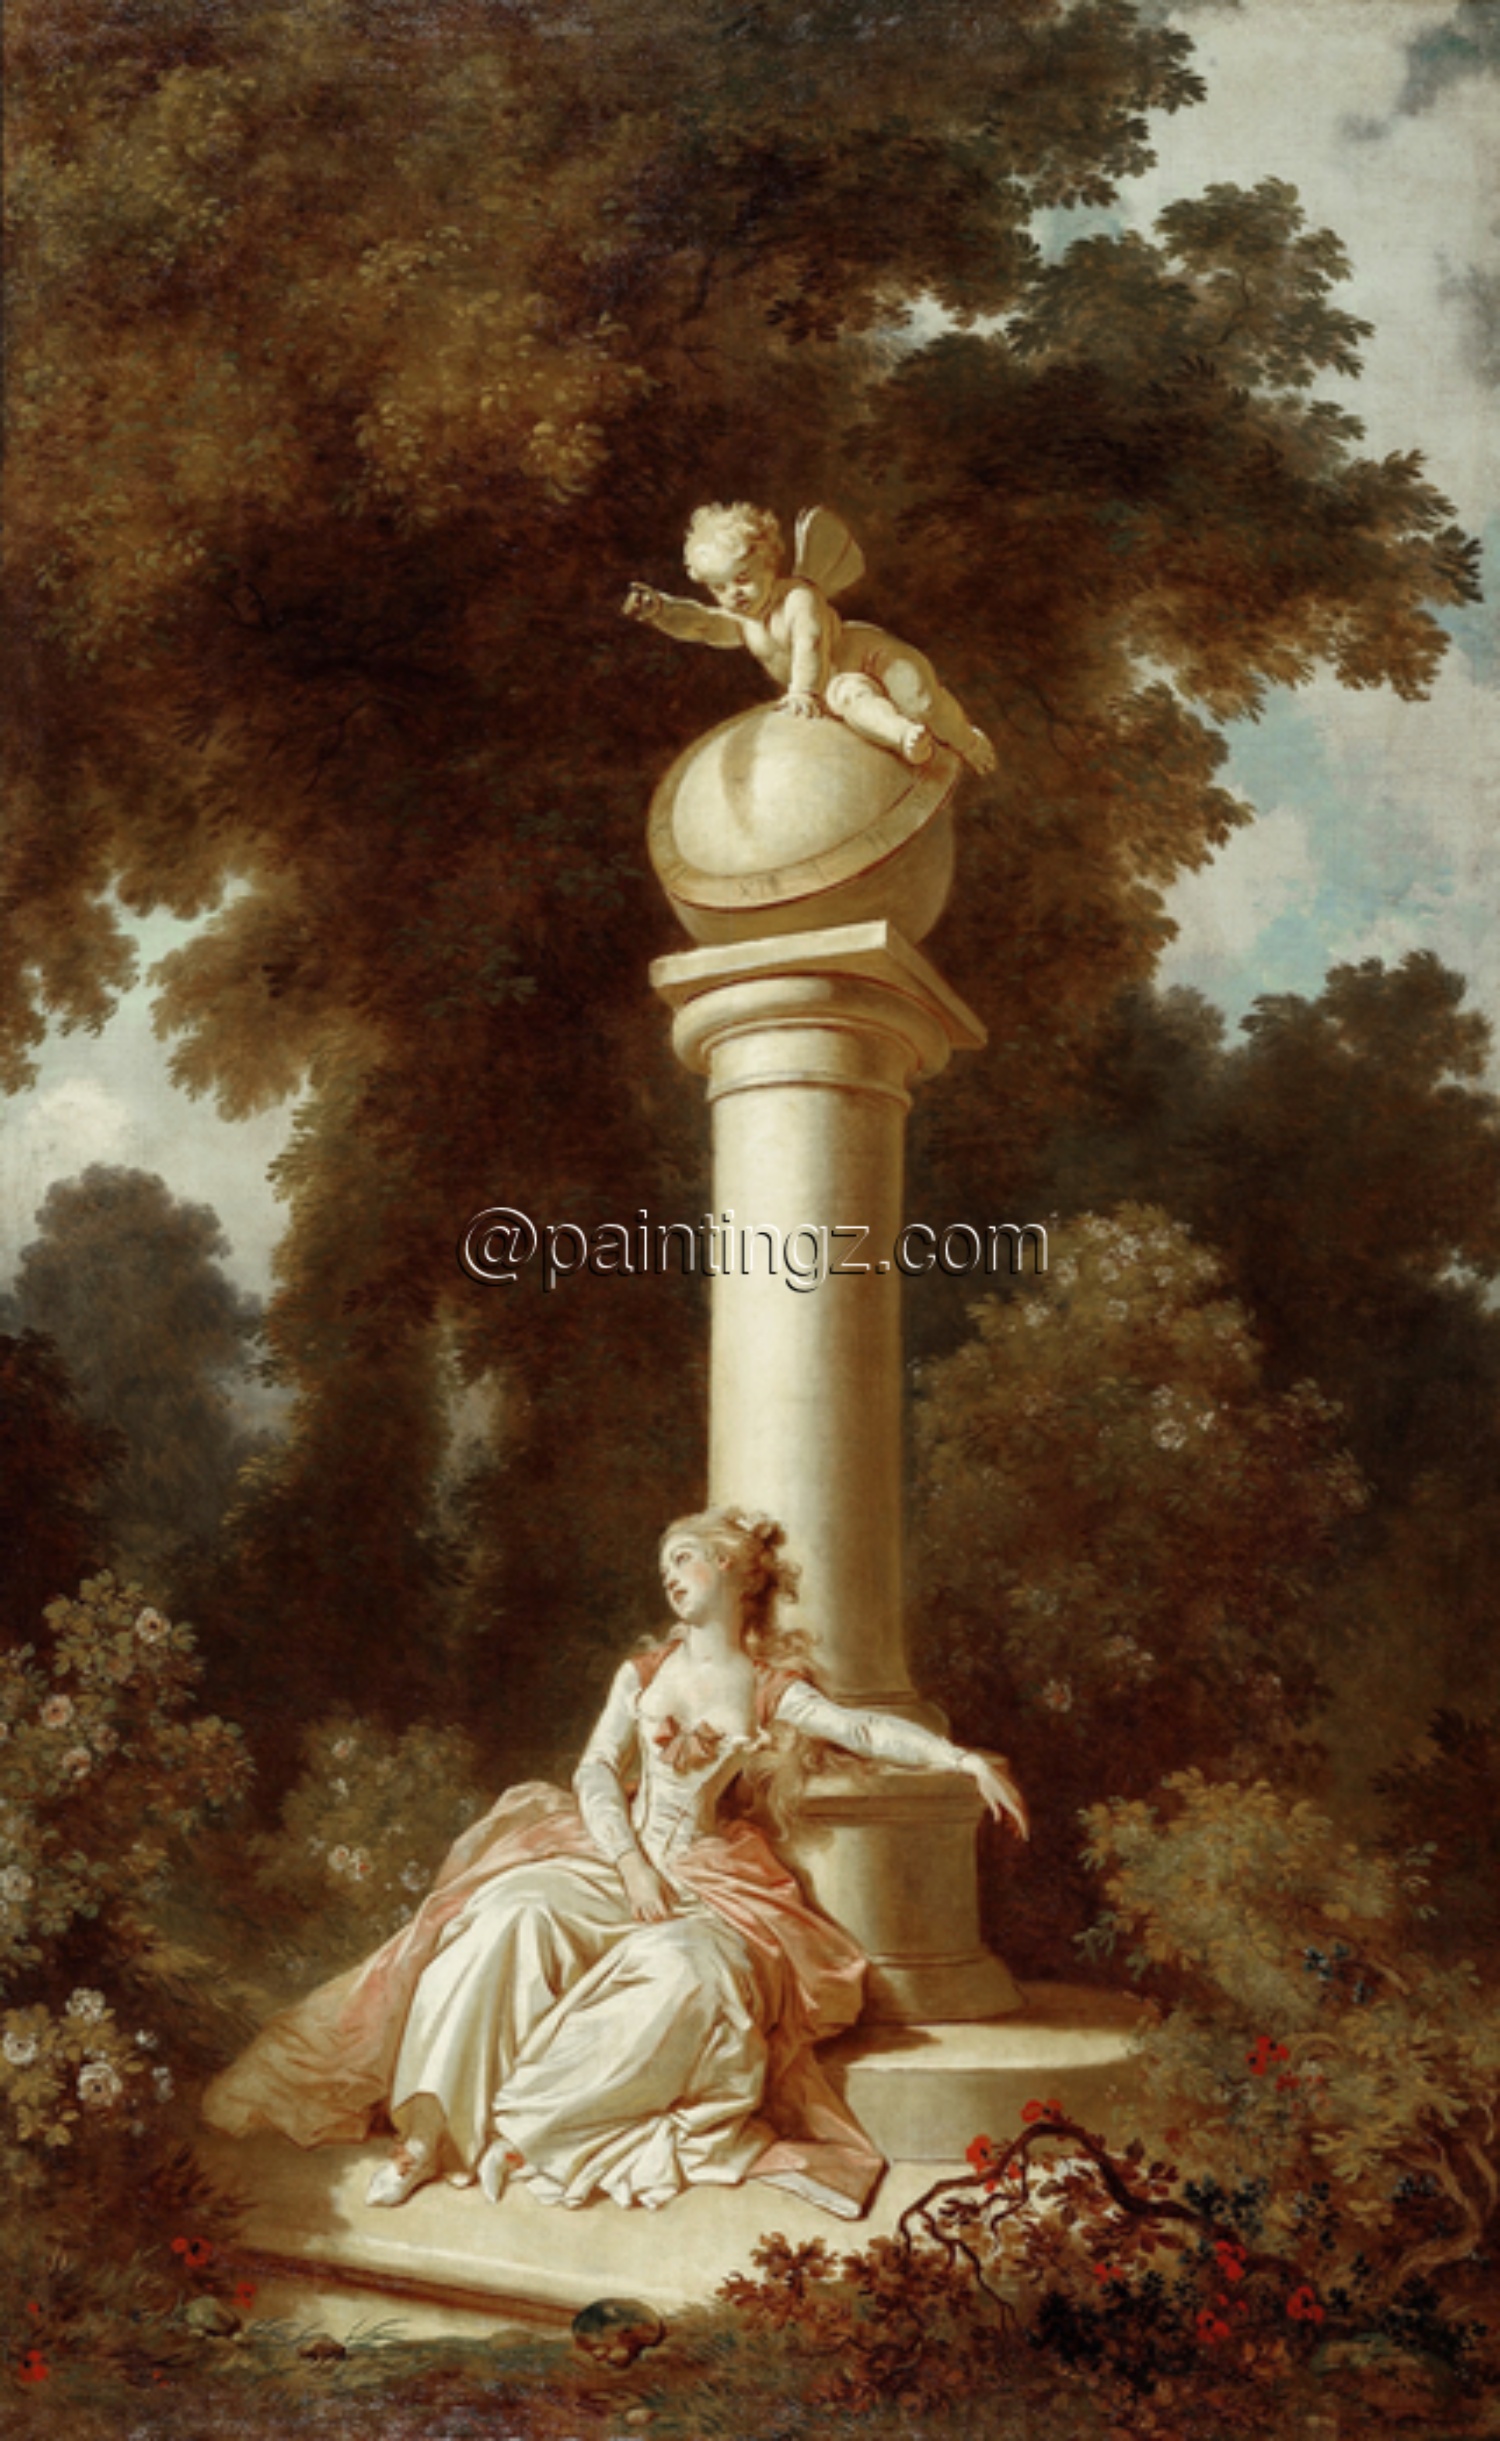 The original painting of "The Progress of Love: Reverie" by  Jean-Honoré Fragonard is long and narrow. 